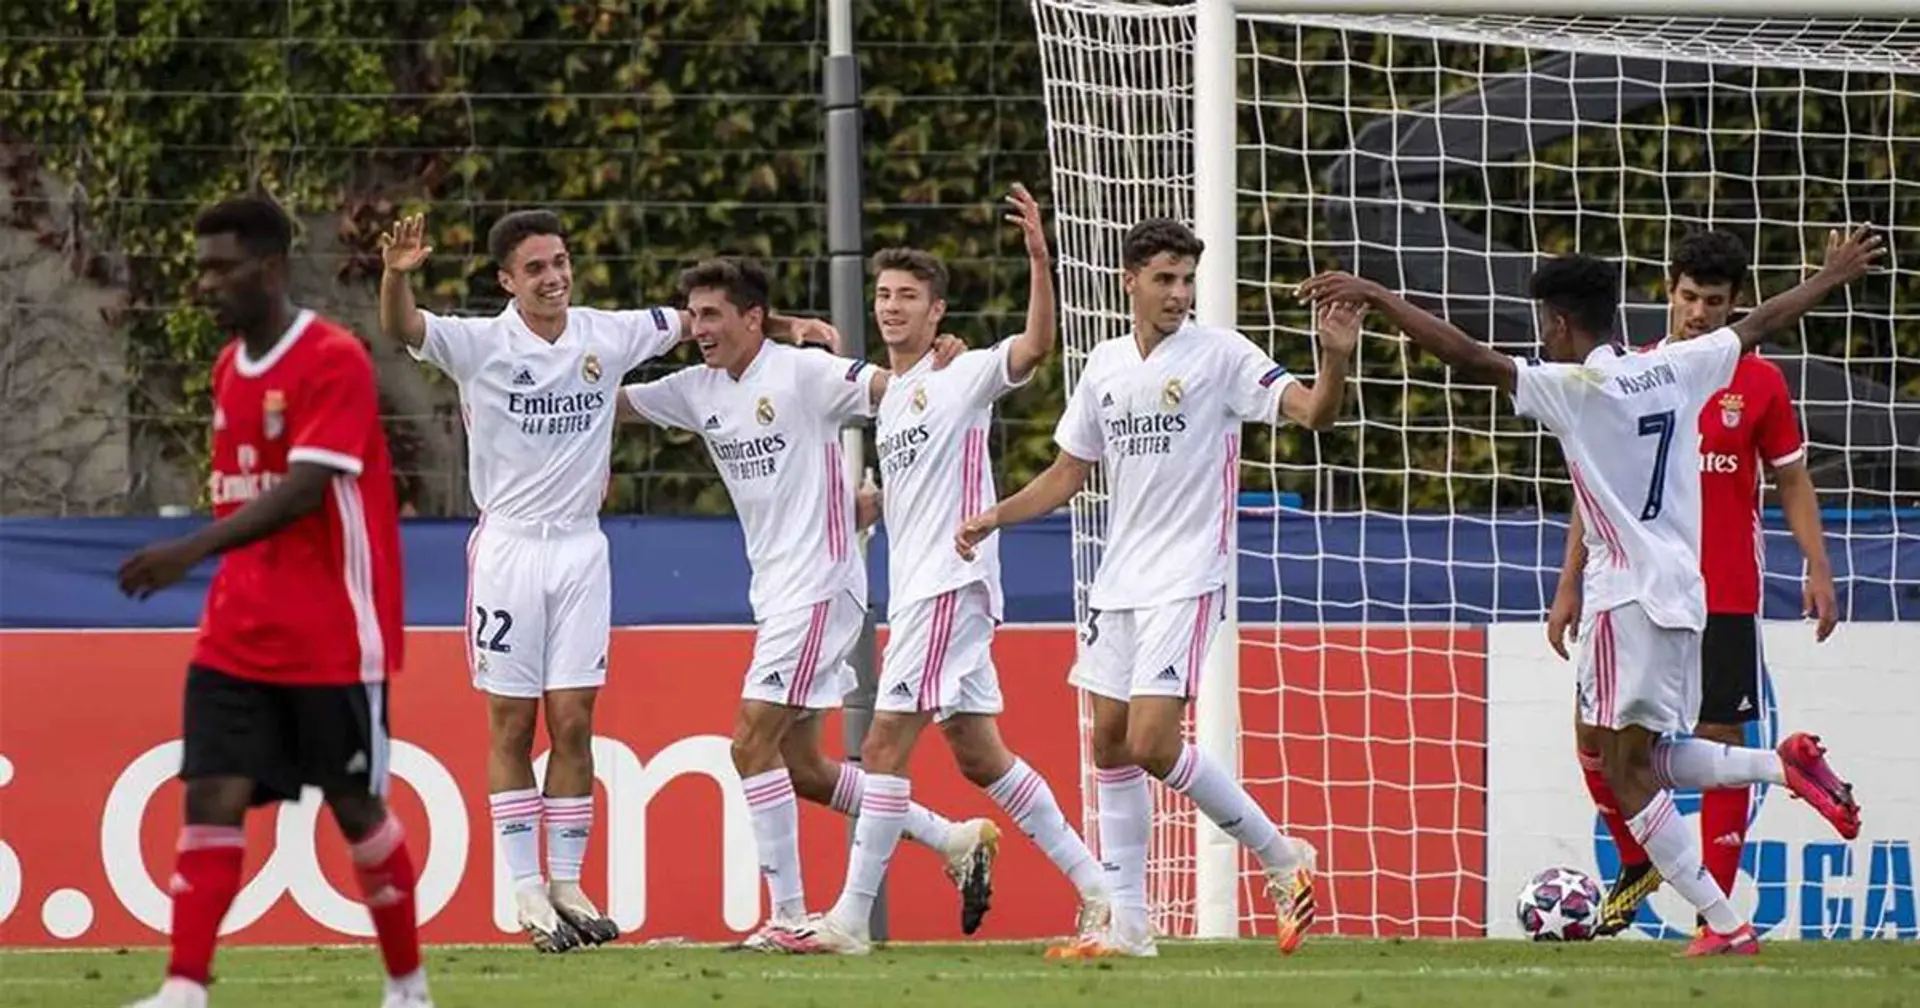 OFFICIAL: Madrid Juvenil A win UEFA Youth League for first time after defeating Benfica U19 in thrilling final